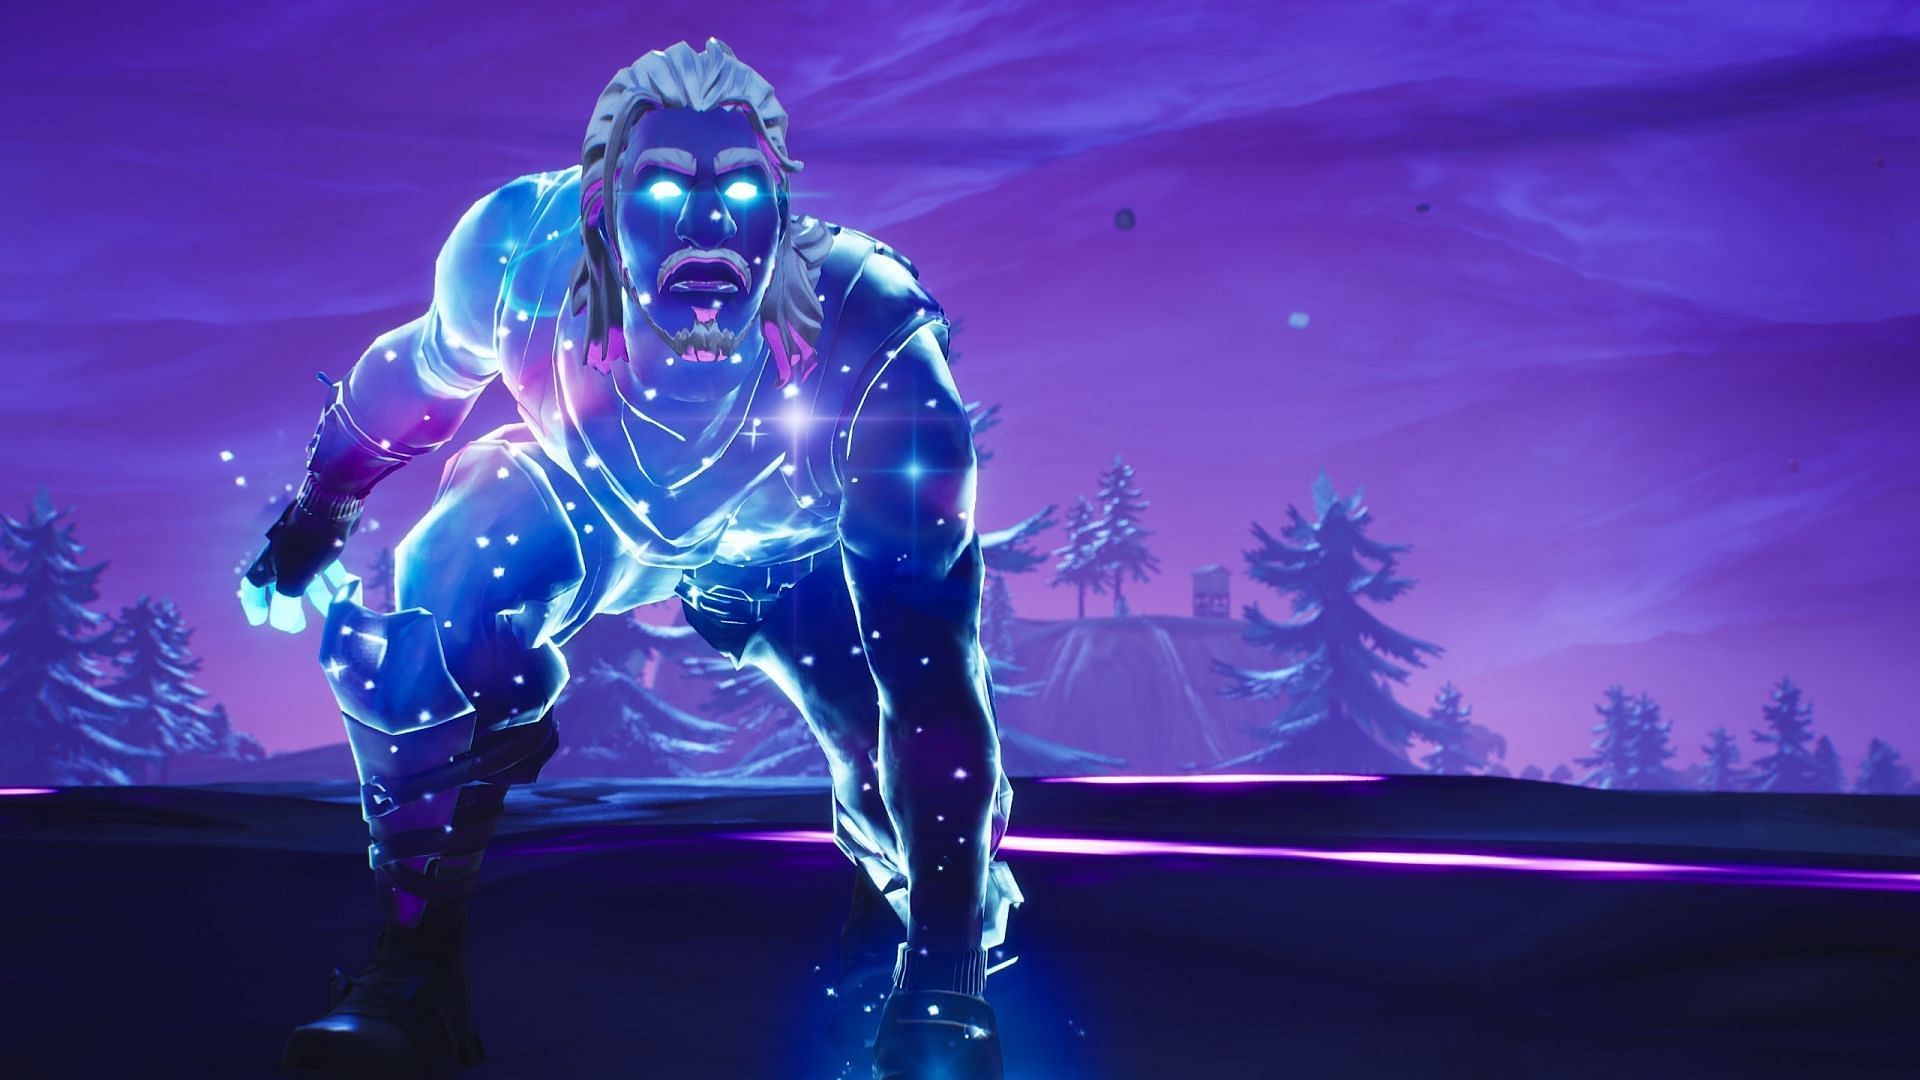 Galaxy skin is one of the most hyped cosmetic in the game (Image via Epic Games)